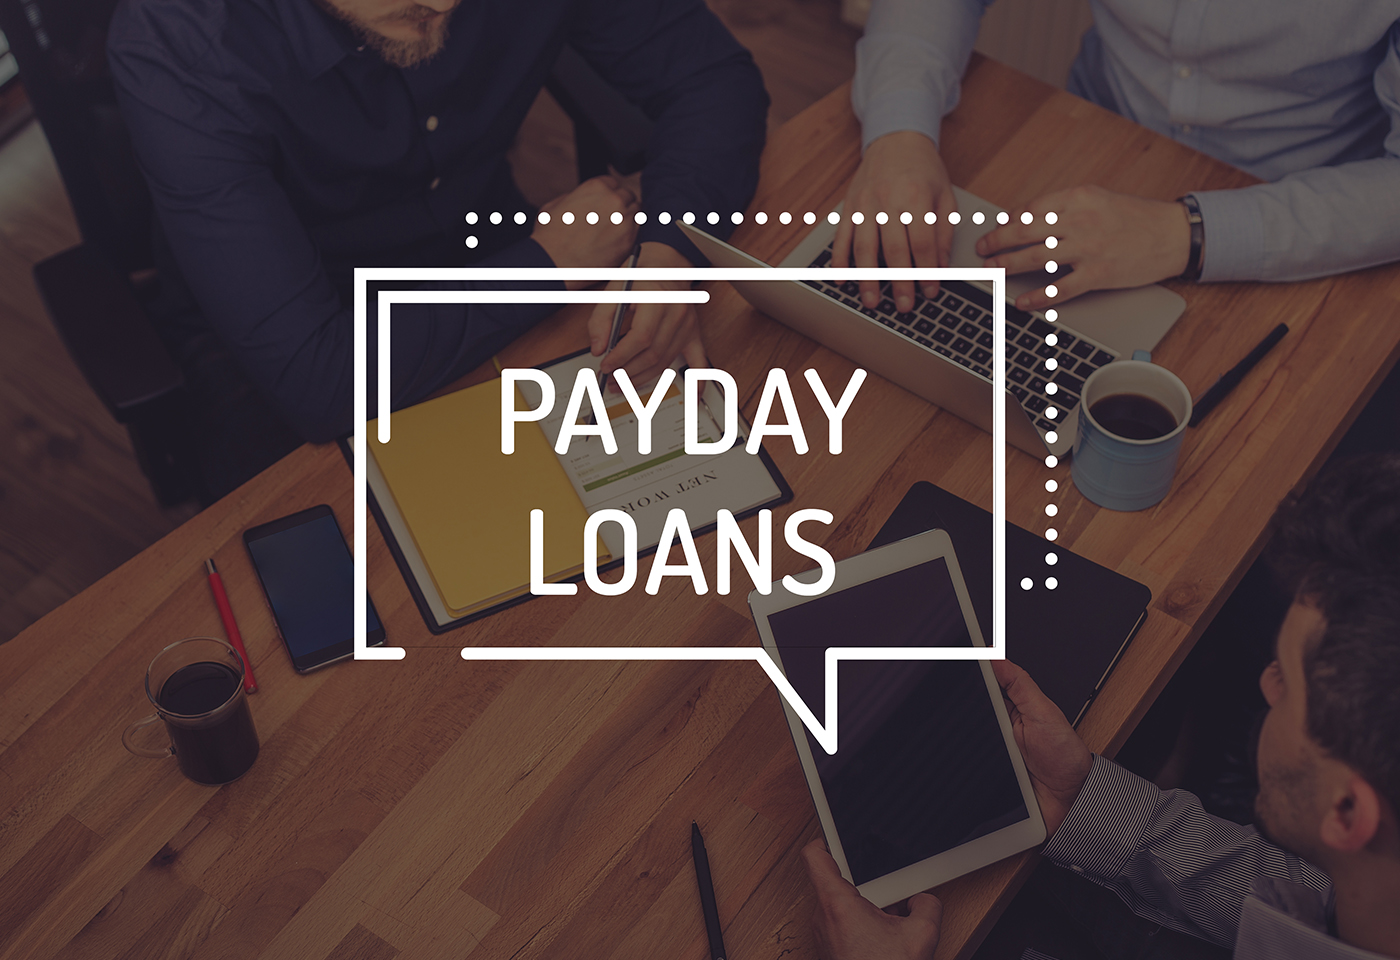 Real Payday Loan Help